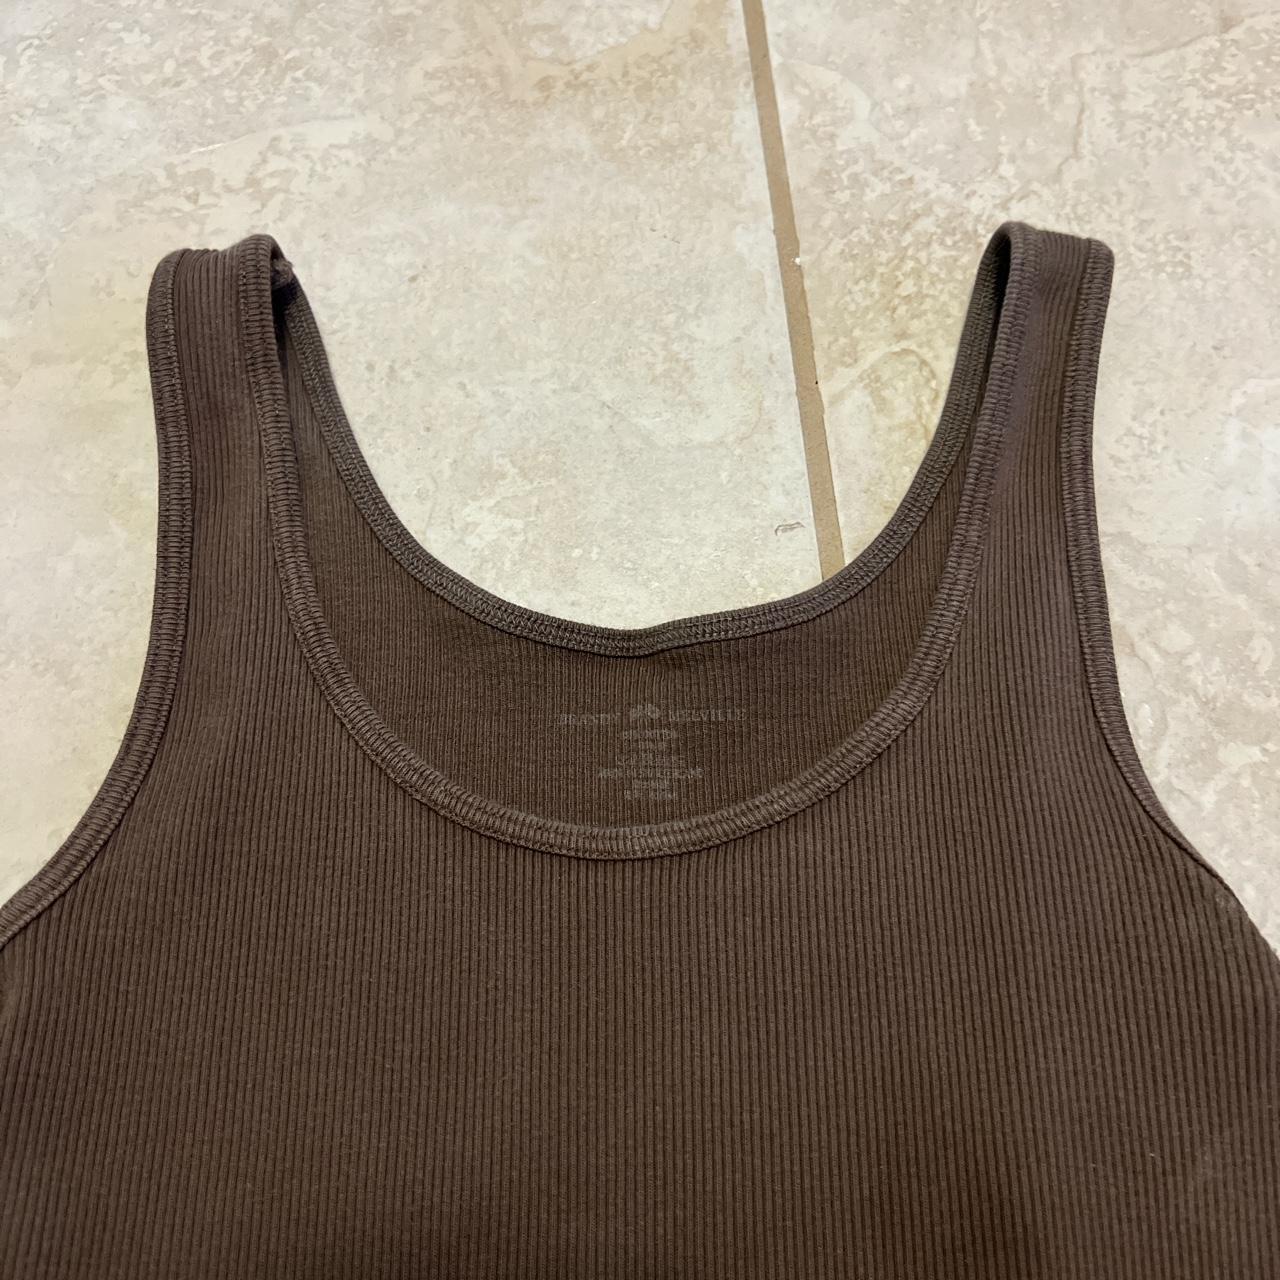 Brandy Melville Connor Tank Brown - $8 (50% Off Retail) - From Kayla